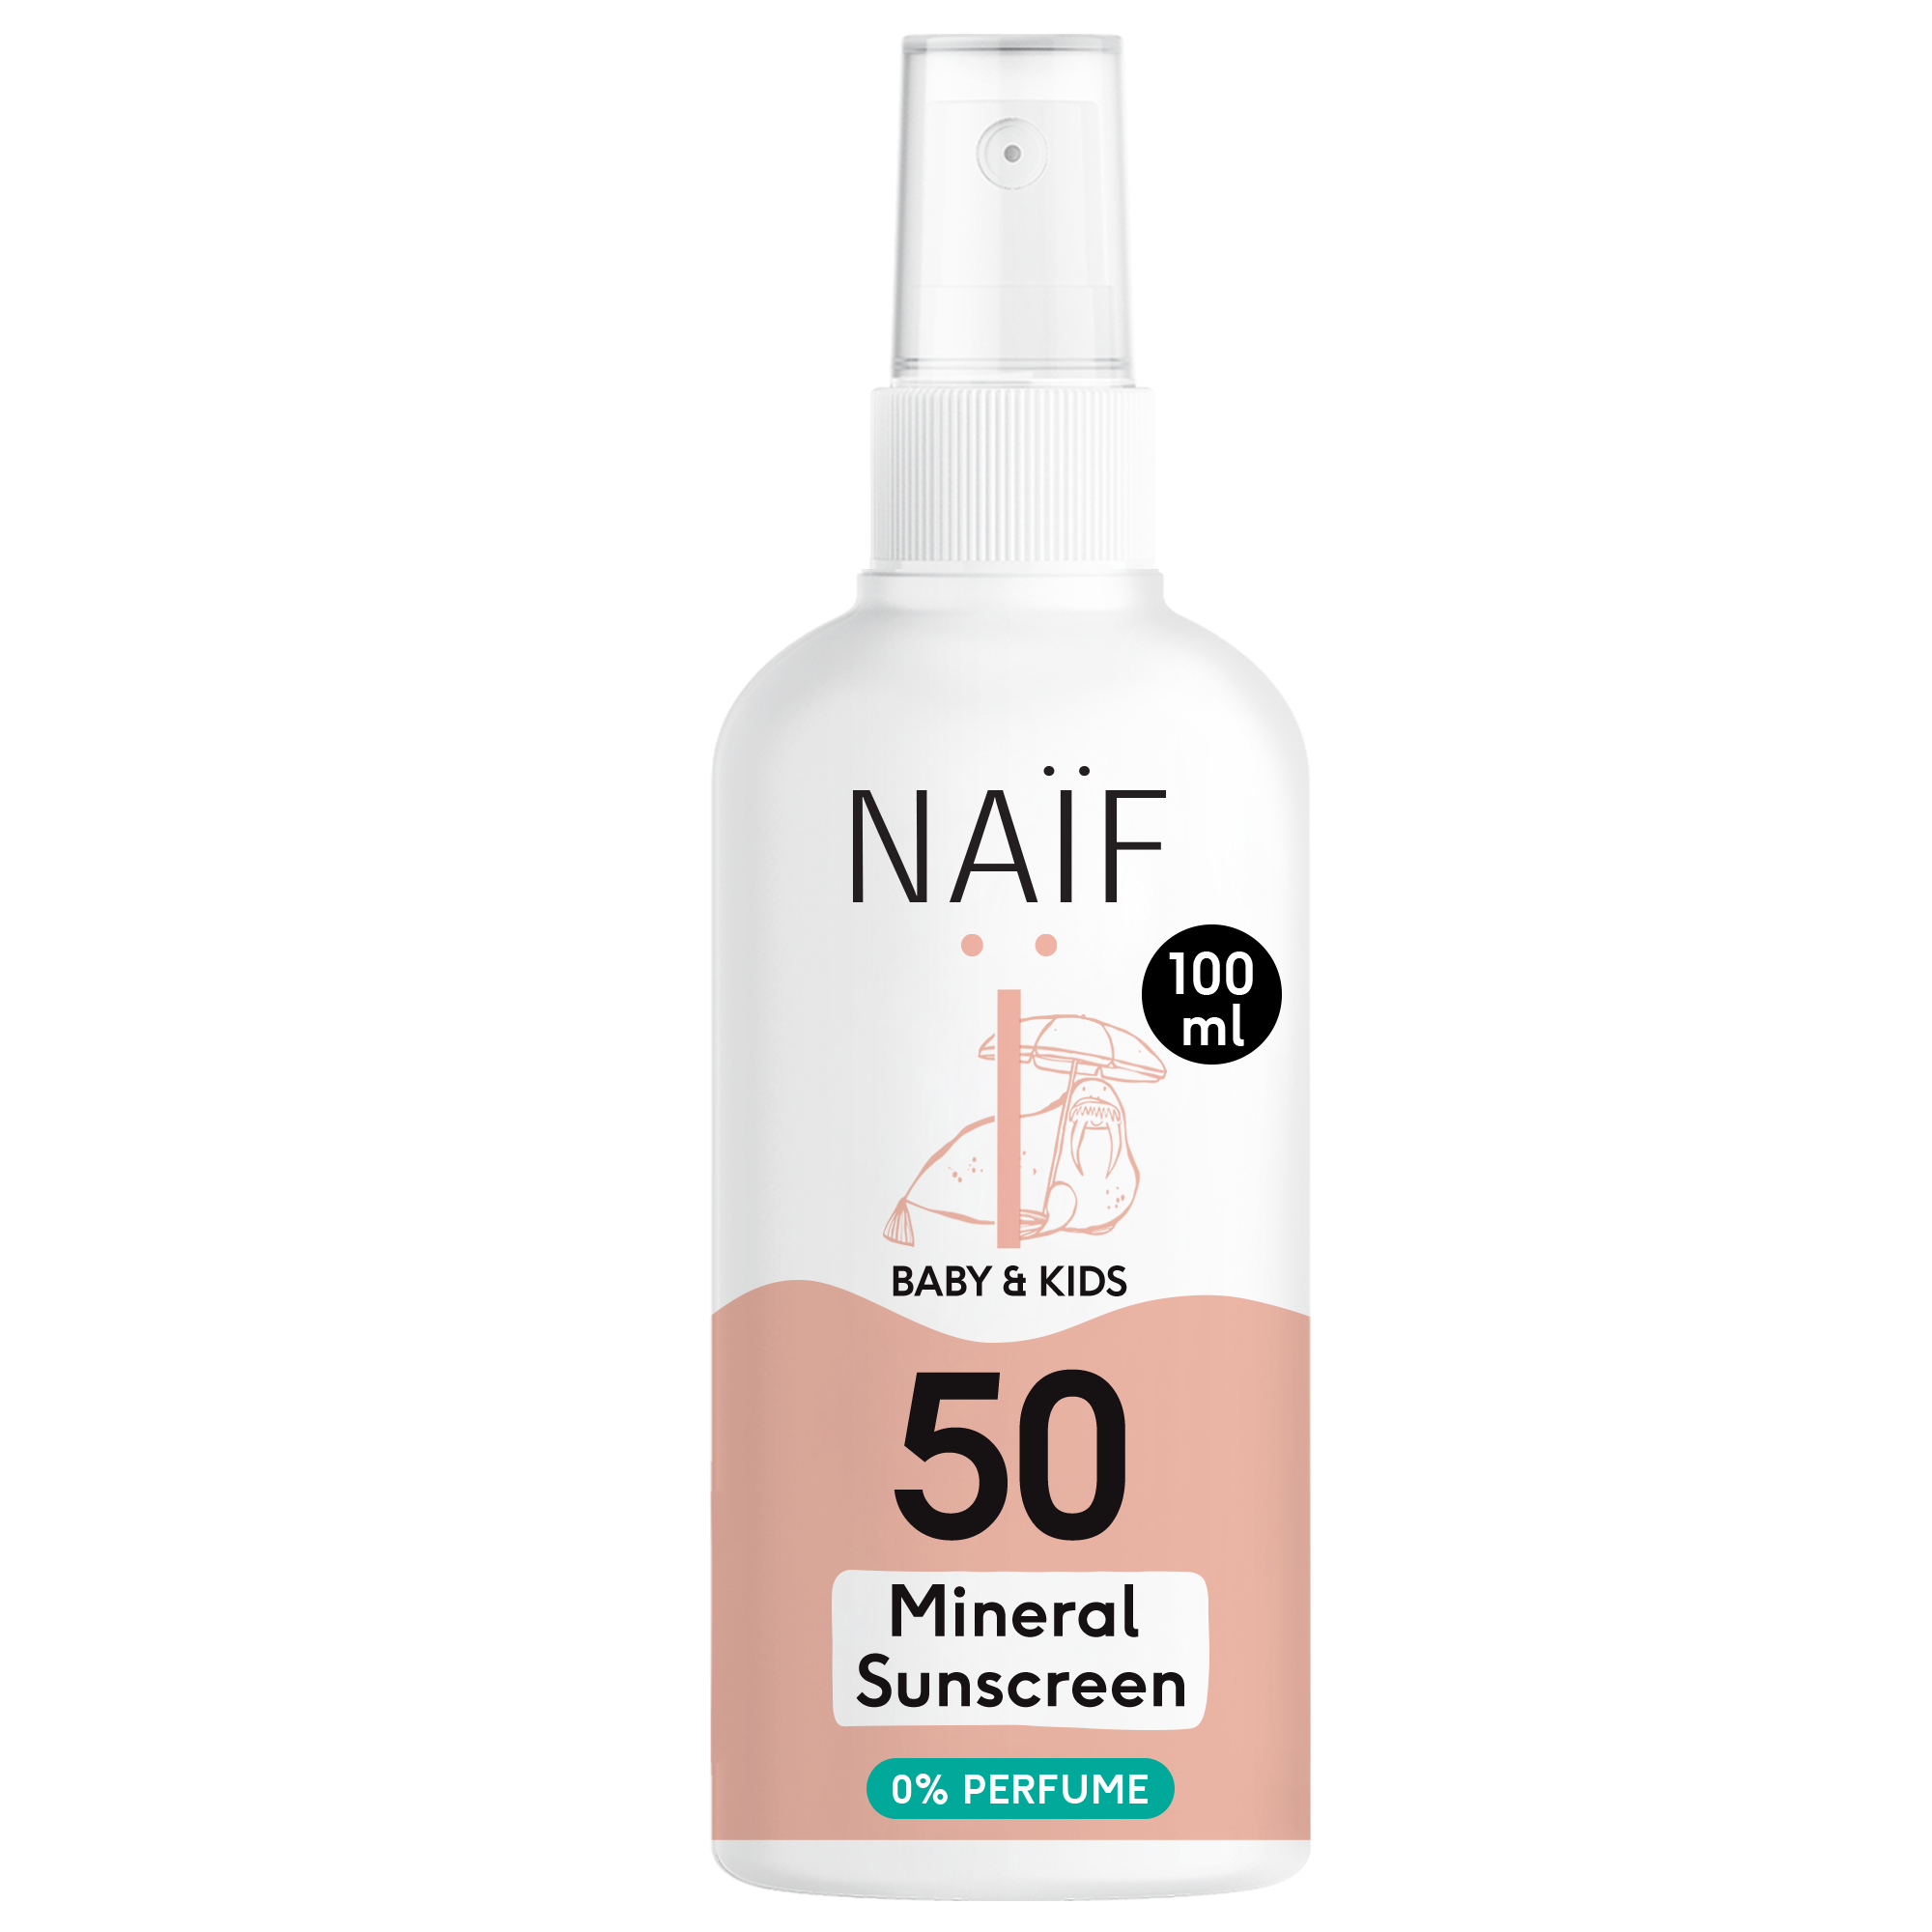 Mineral Sunscreen Spray 0% perfume SPF50 for Baby & Kids 100ml